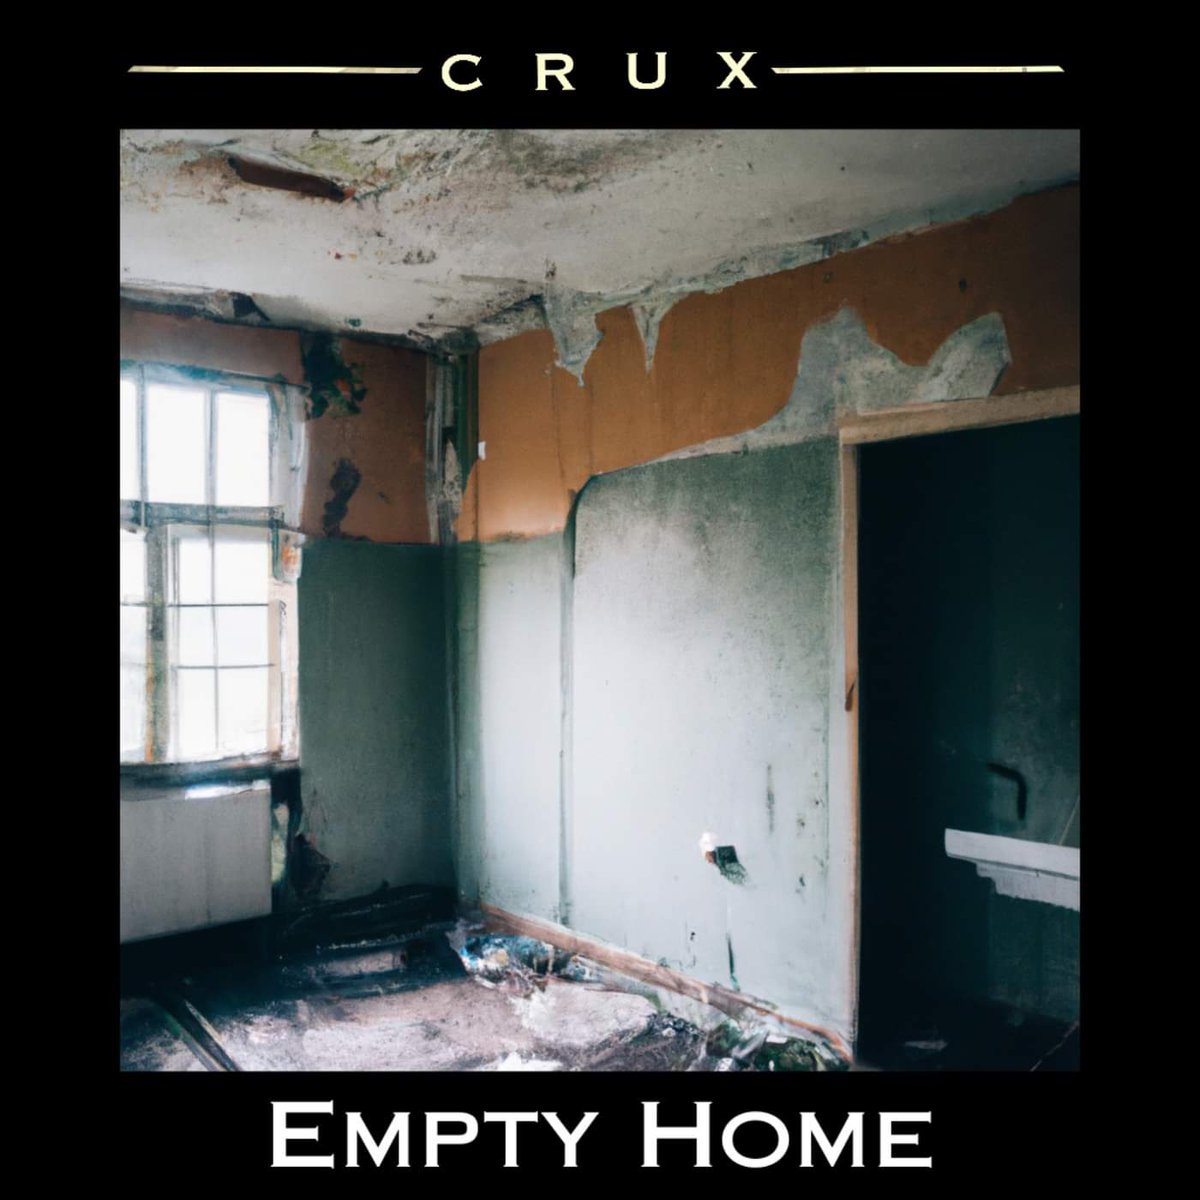 OUT NOW!!! @CruxNewcastle 'EMPTY HOME' STREAM: open.spotify.com/track/5MDi2GH4… #crux #cruxband #emptyhome #newsingle #newsinglealert #newsinglerelease #newsingle2023 #newmusic #newmusicalert #newmusic2023 #newmusicrelease #indie #indierock #band #musicians